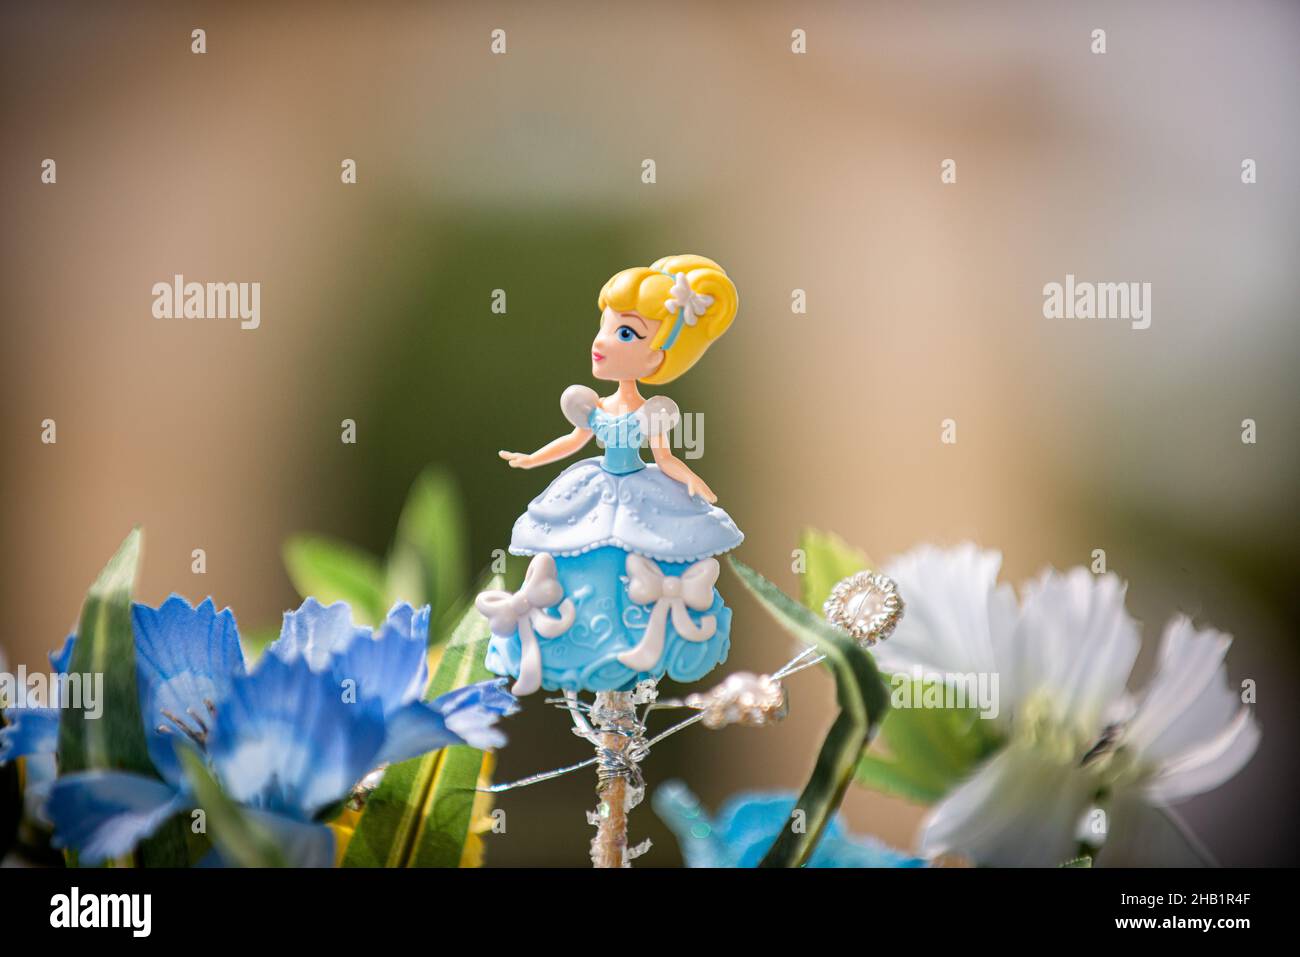 Blond Cinderella cake topper wearing blue and white dress surrounded by blue flowers Stock Photo